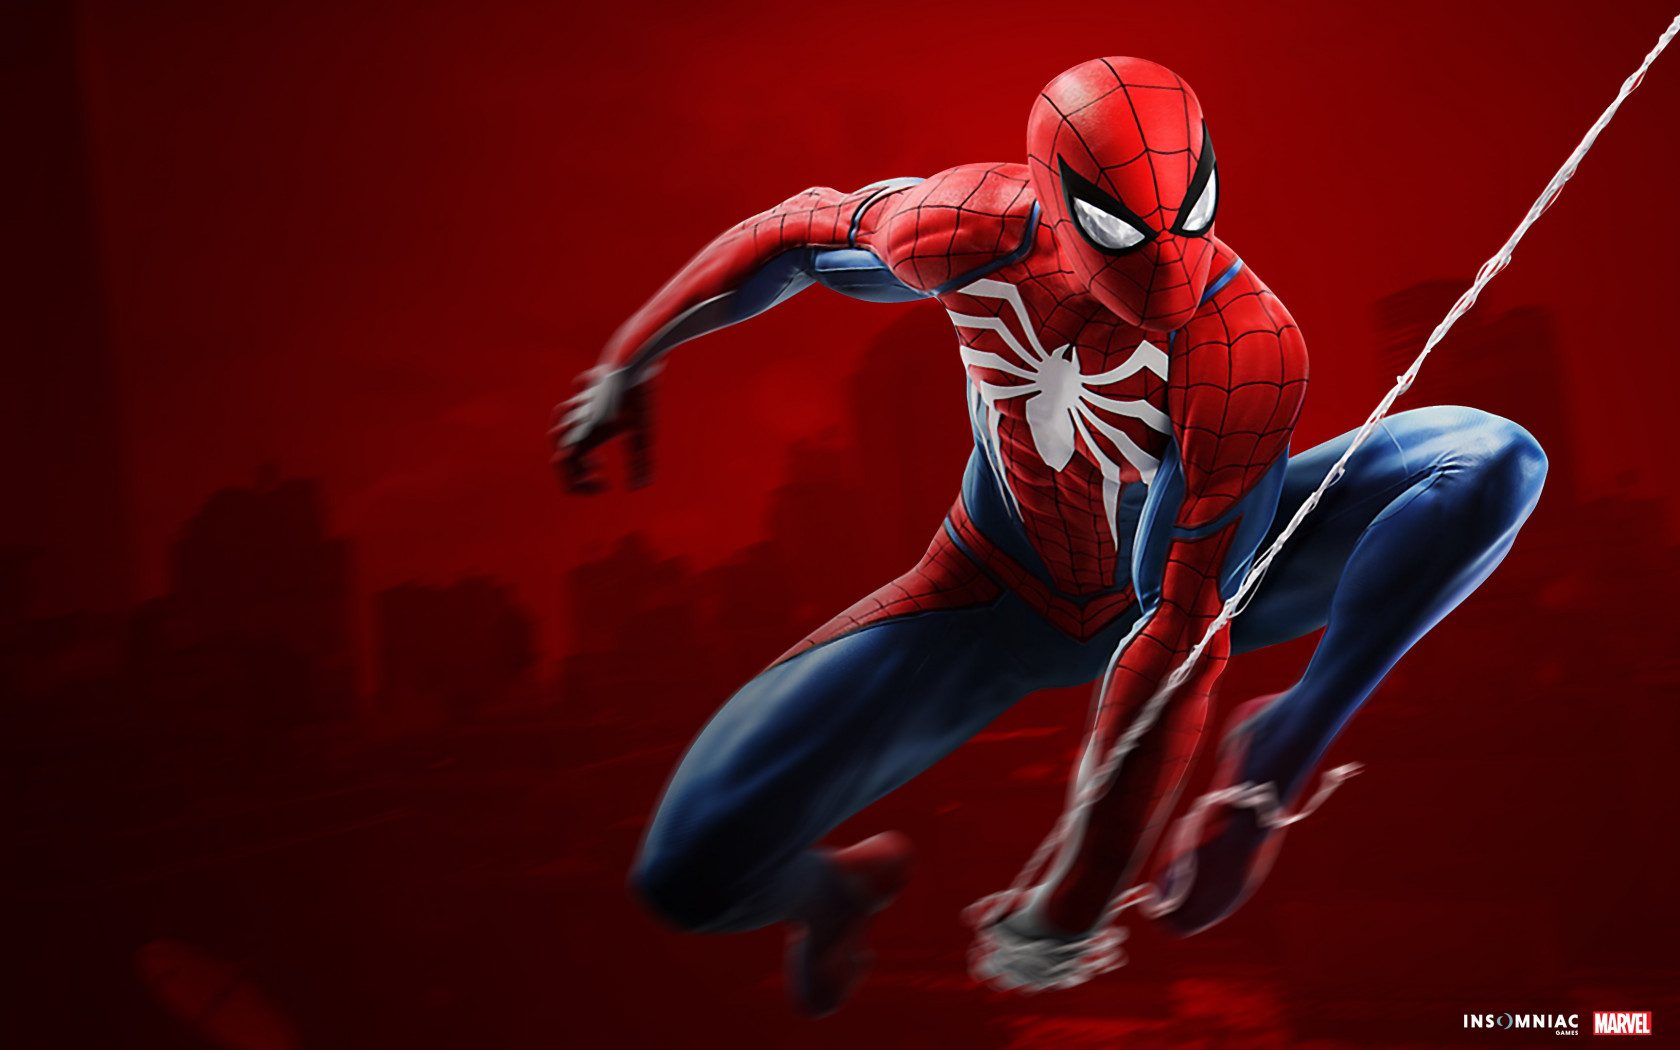 Spider Man game on PS4 wallpaper 1680x1050